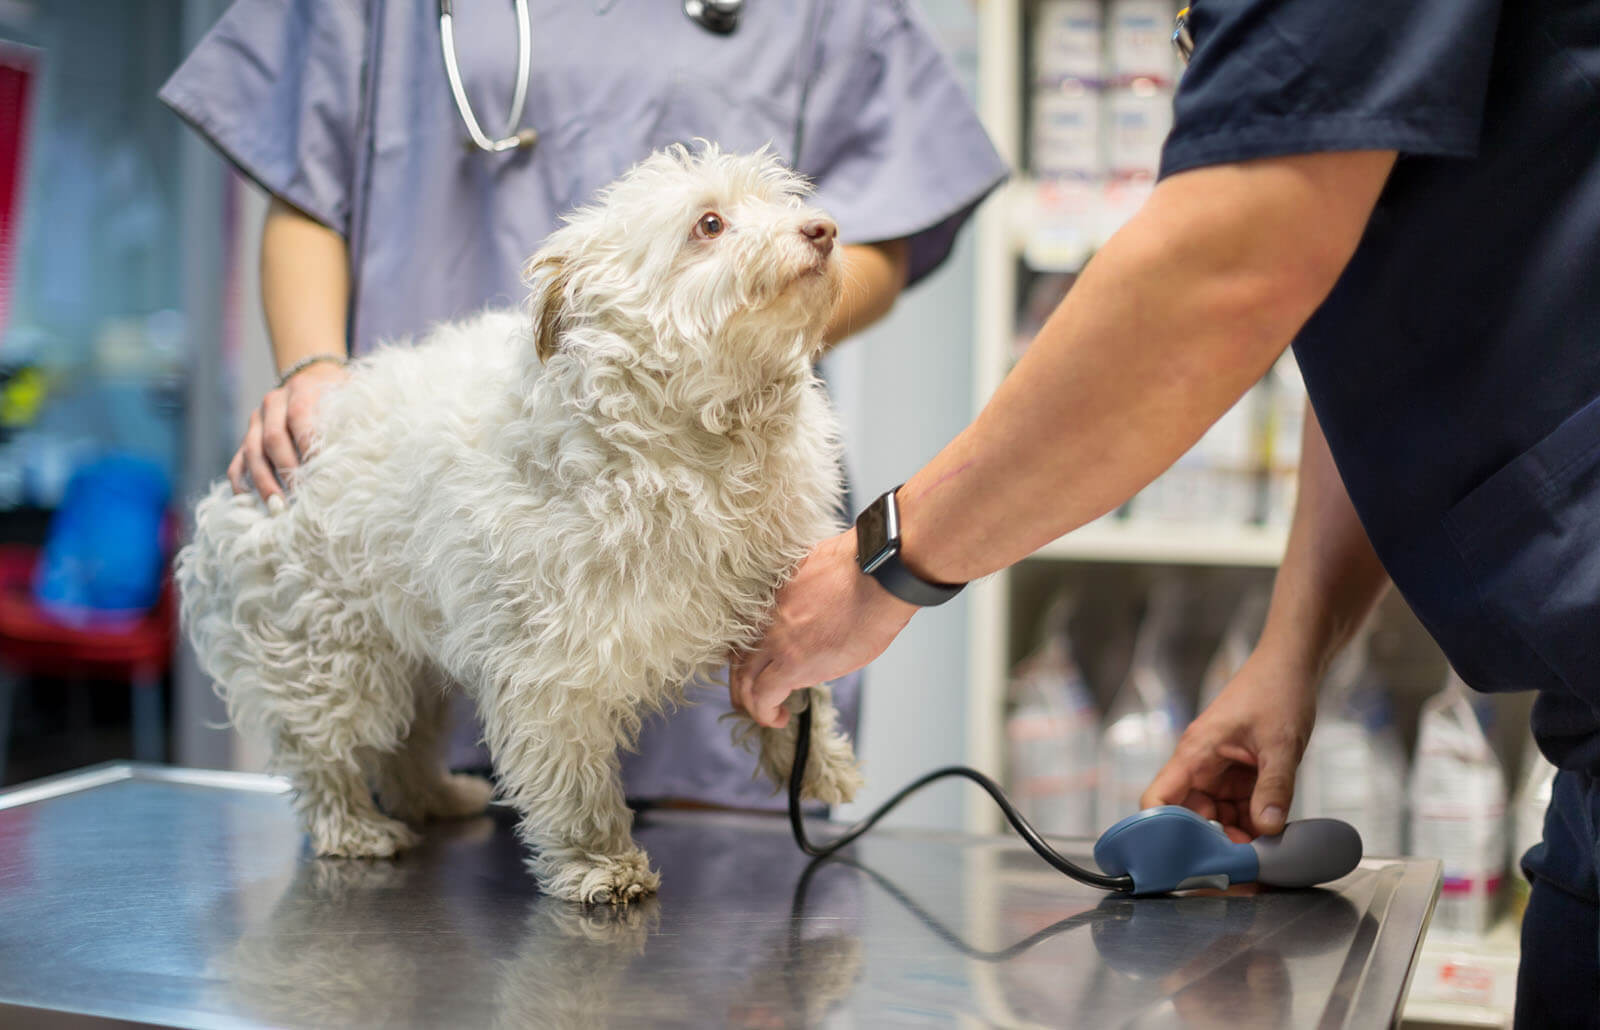 How do you check a dog's blood pressure?